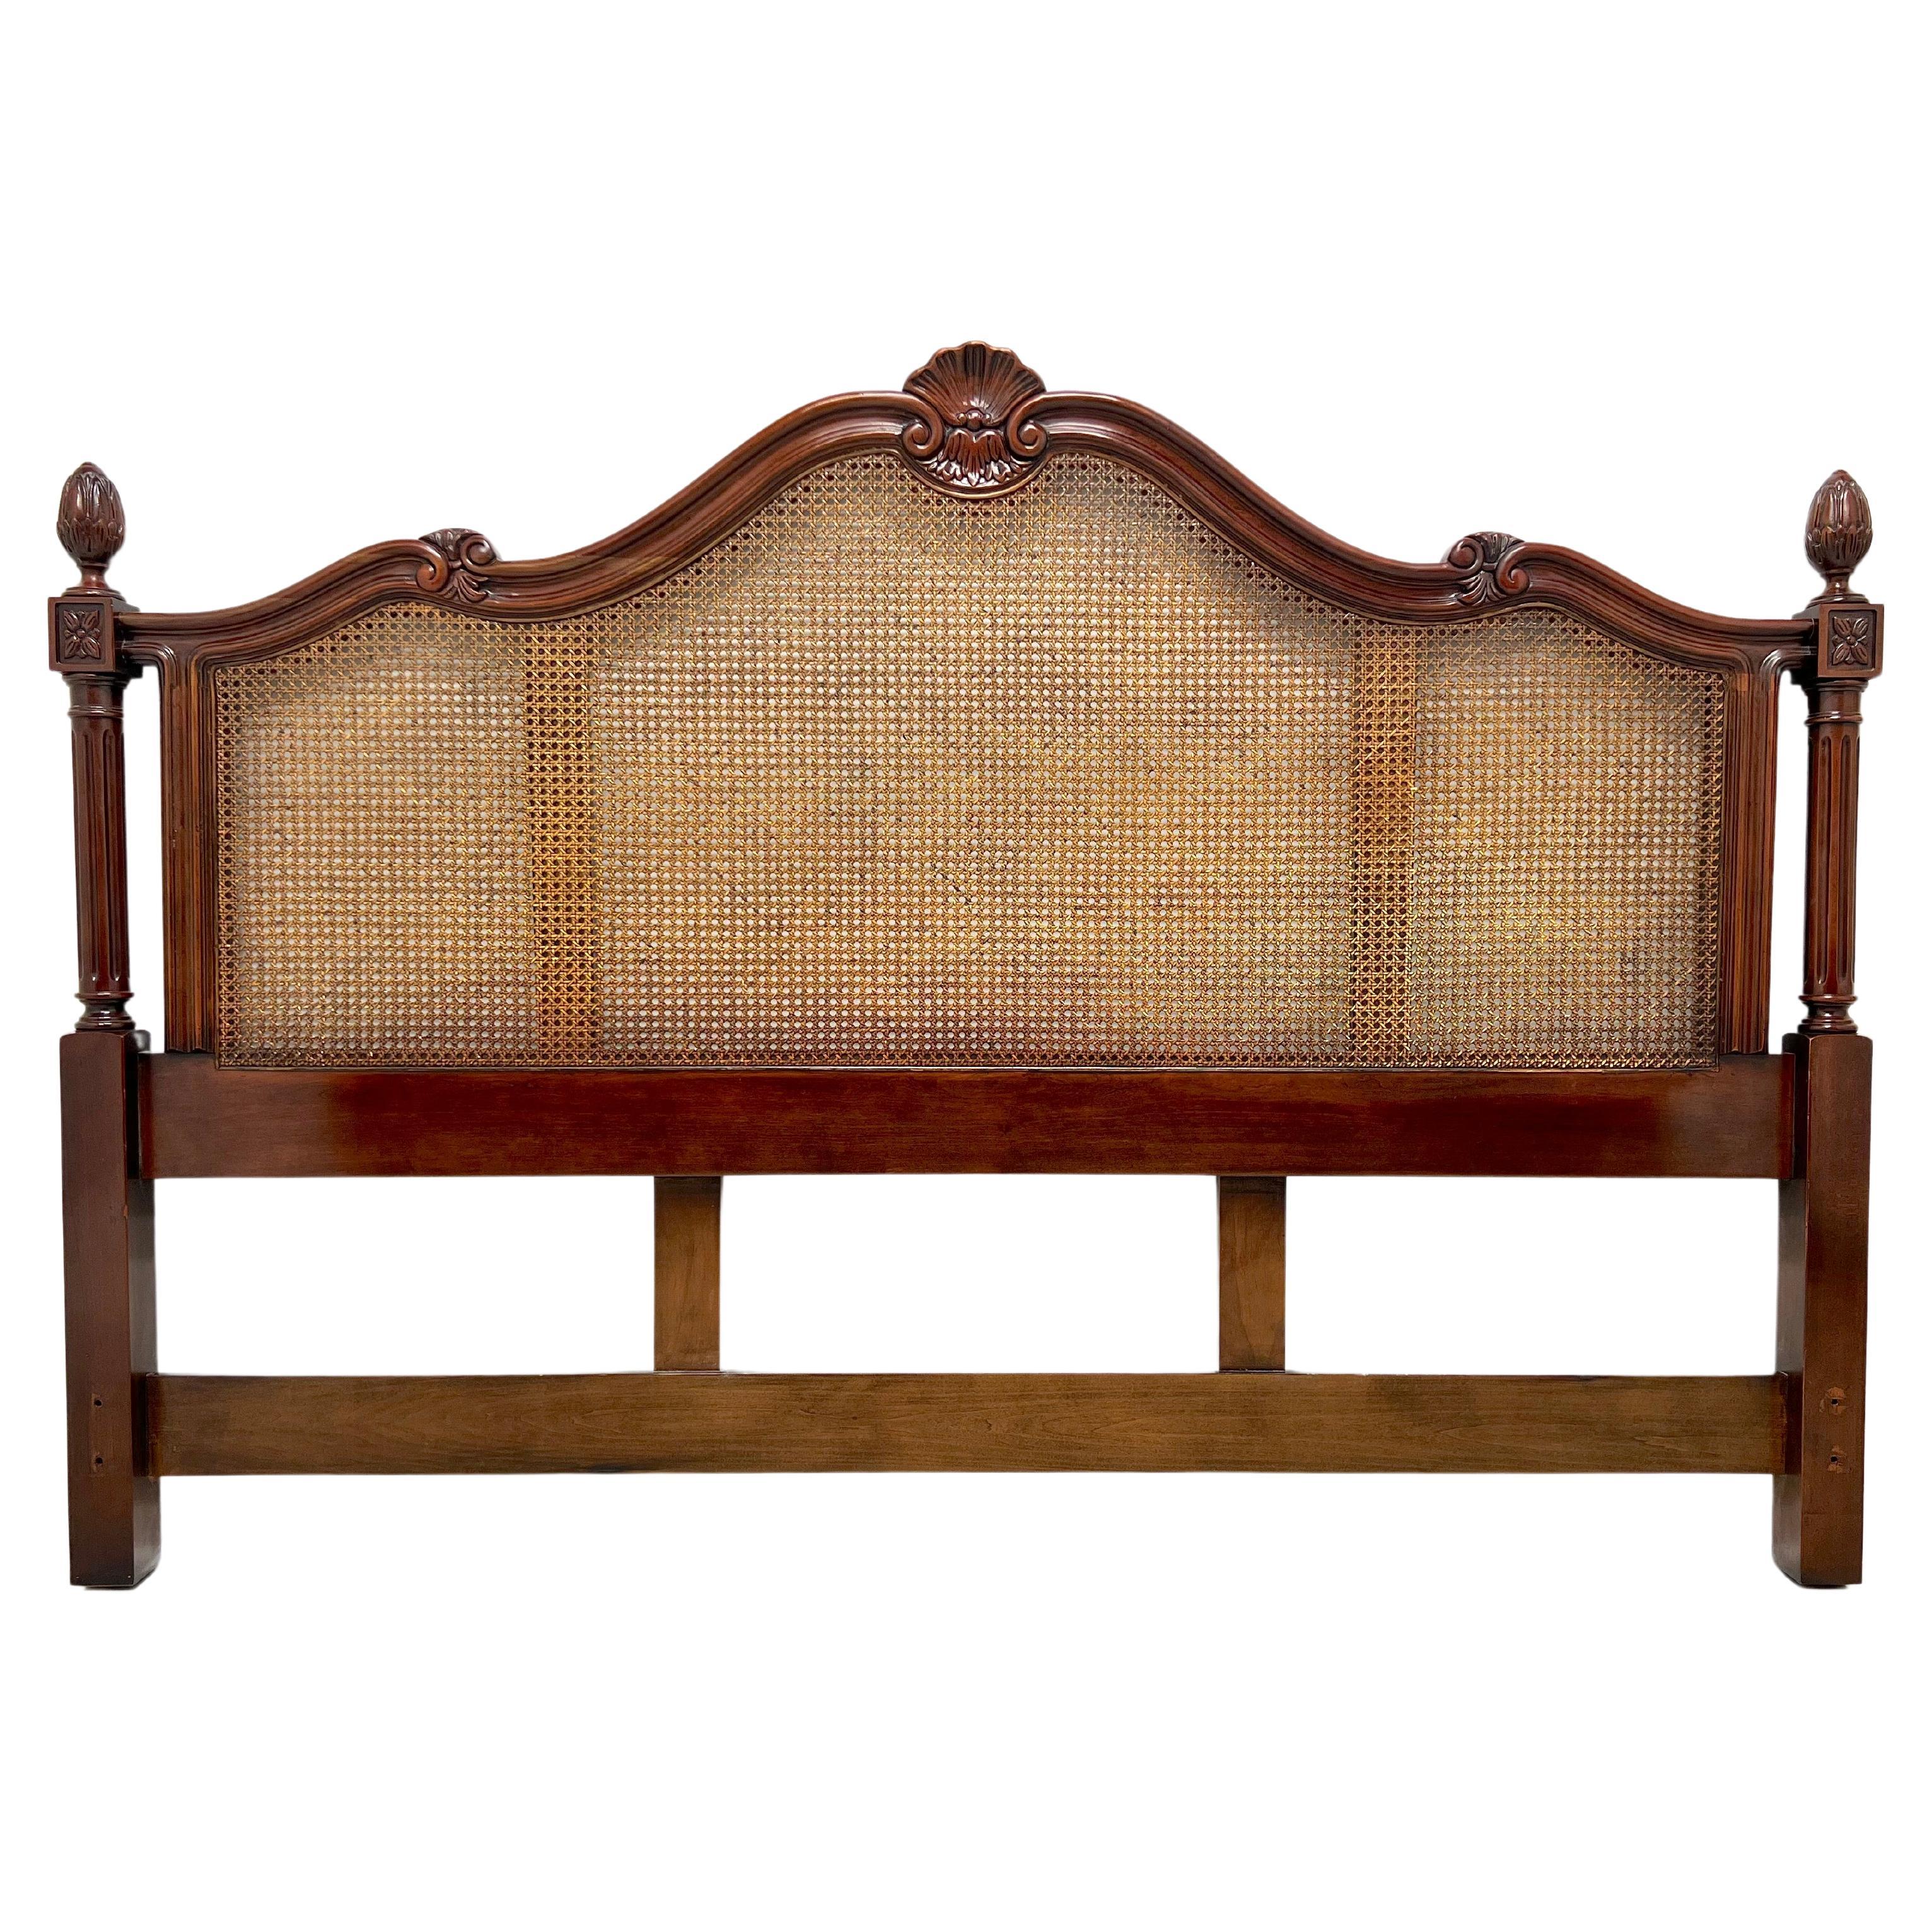 CENTURY Cardella Collection Cherry Caned Italian Provincial King Size Headboard